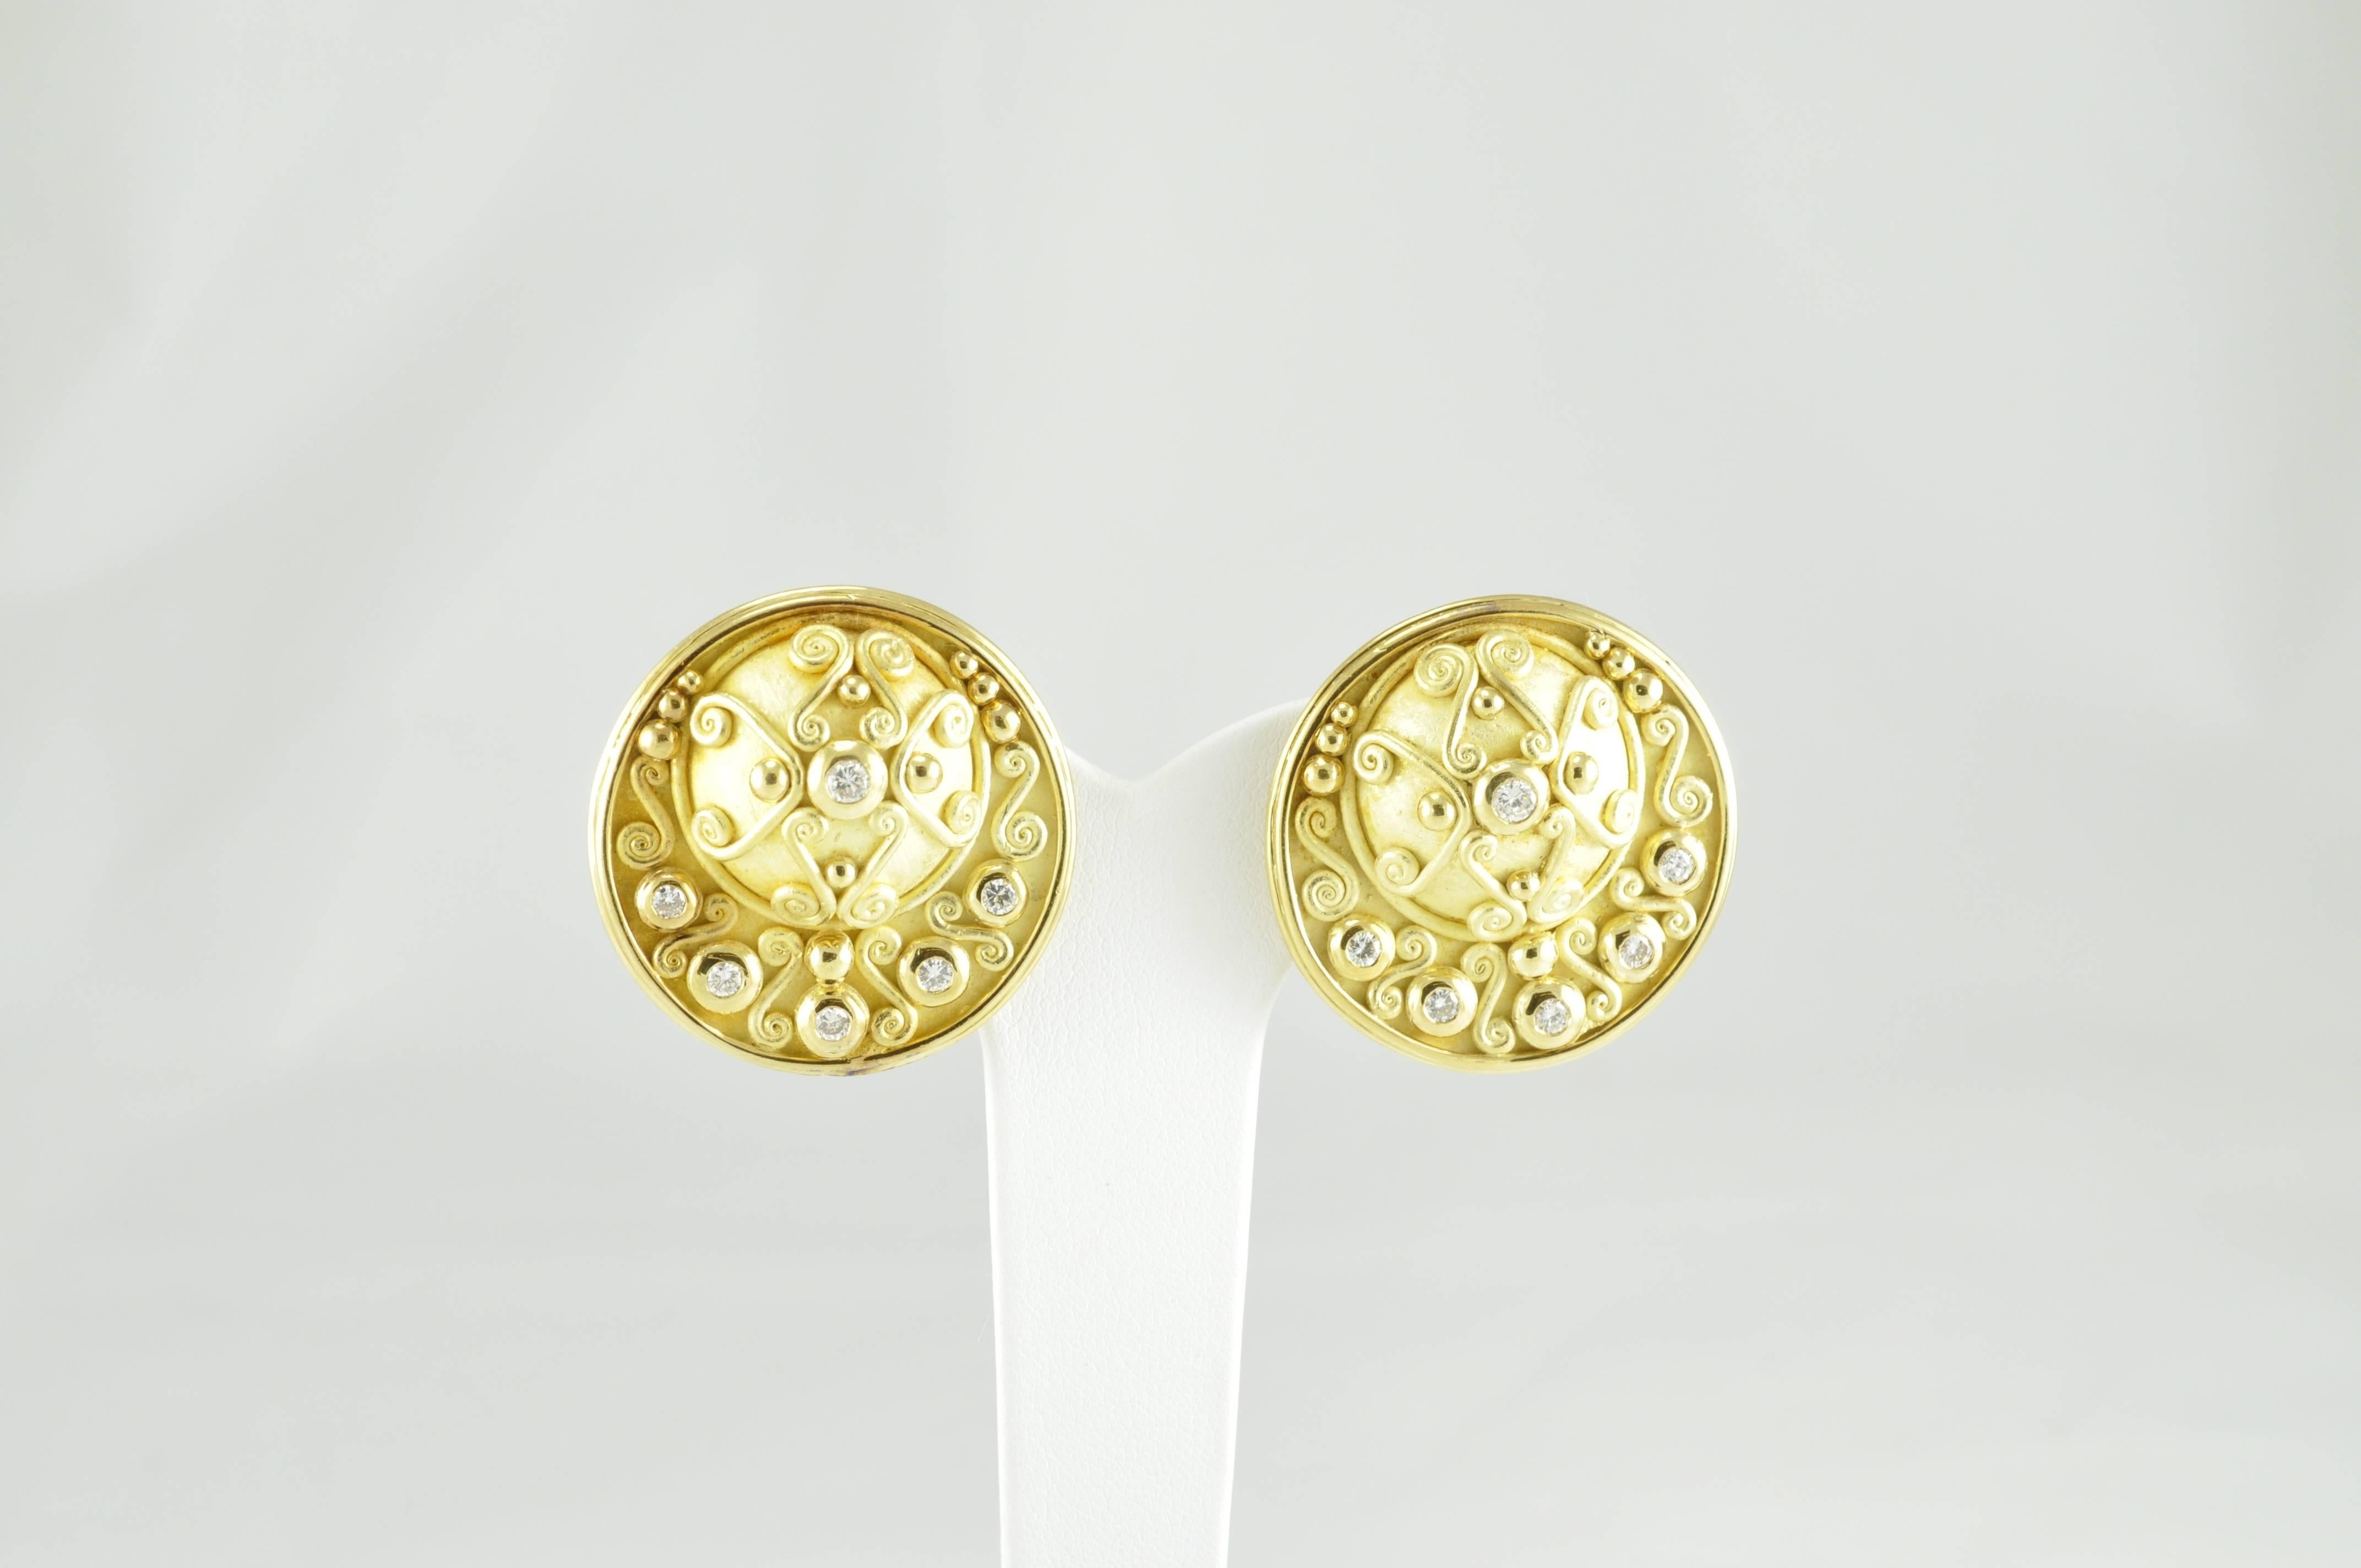 18k Gold Denise Roberge Ornate circular earrings with 0.7ctw Diamonds (6 ea per earring). Designer's stamp beneath clip. Denise Roberge is from California.  She is known for creating pieces that are one of a kind, and uses precious and semi precious